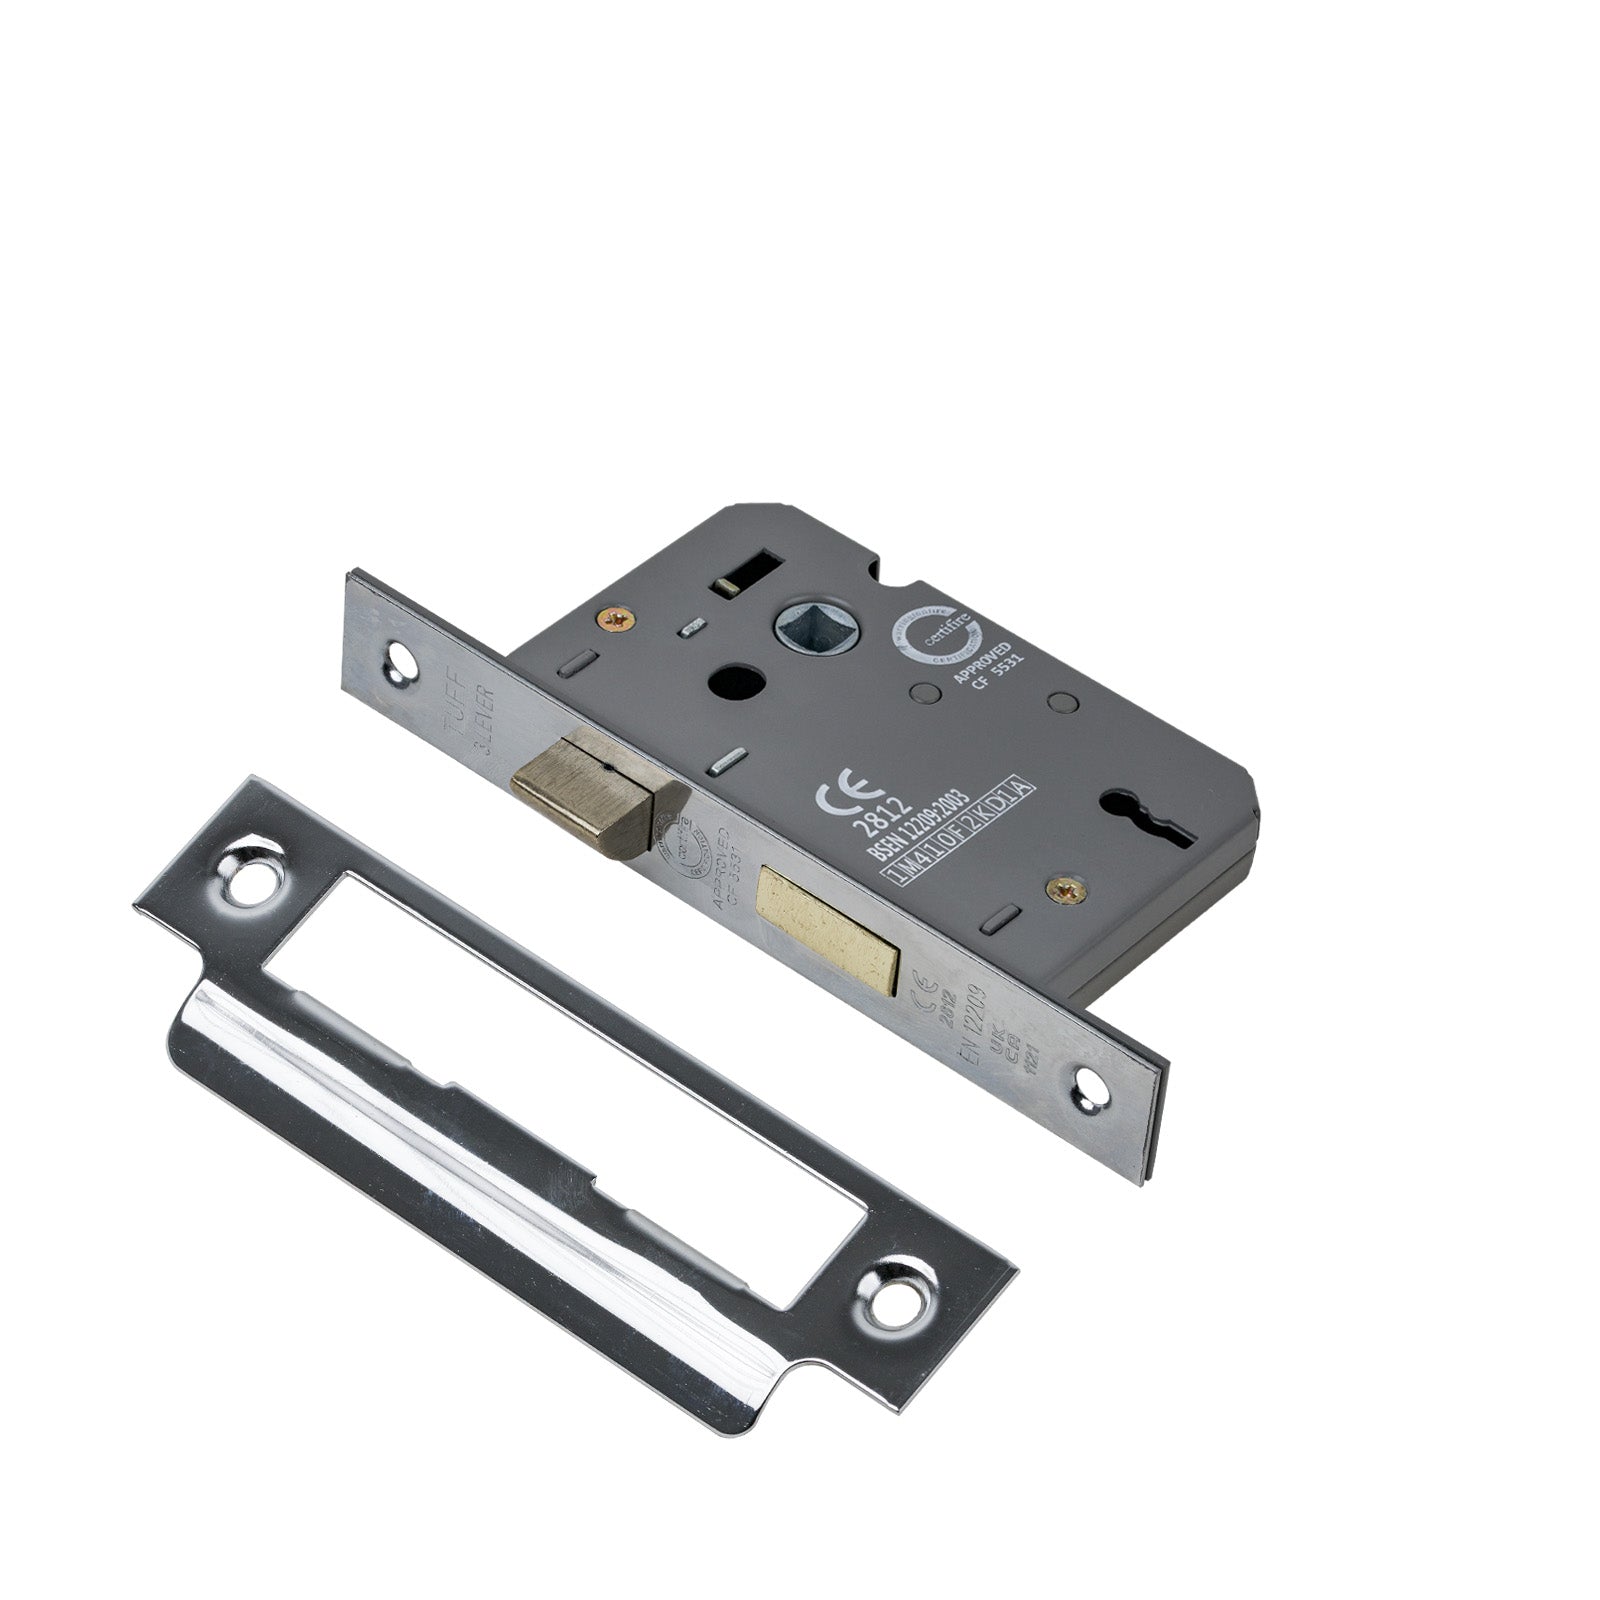 SHOW 3 Lever Sash Lock - 2.5 Inch with Polished Chrome finished forend and striker plate